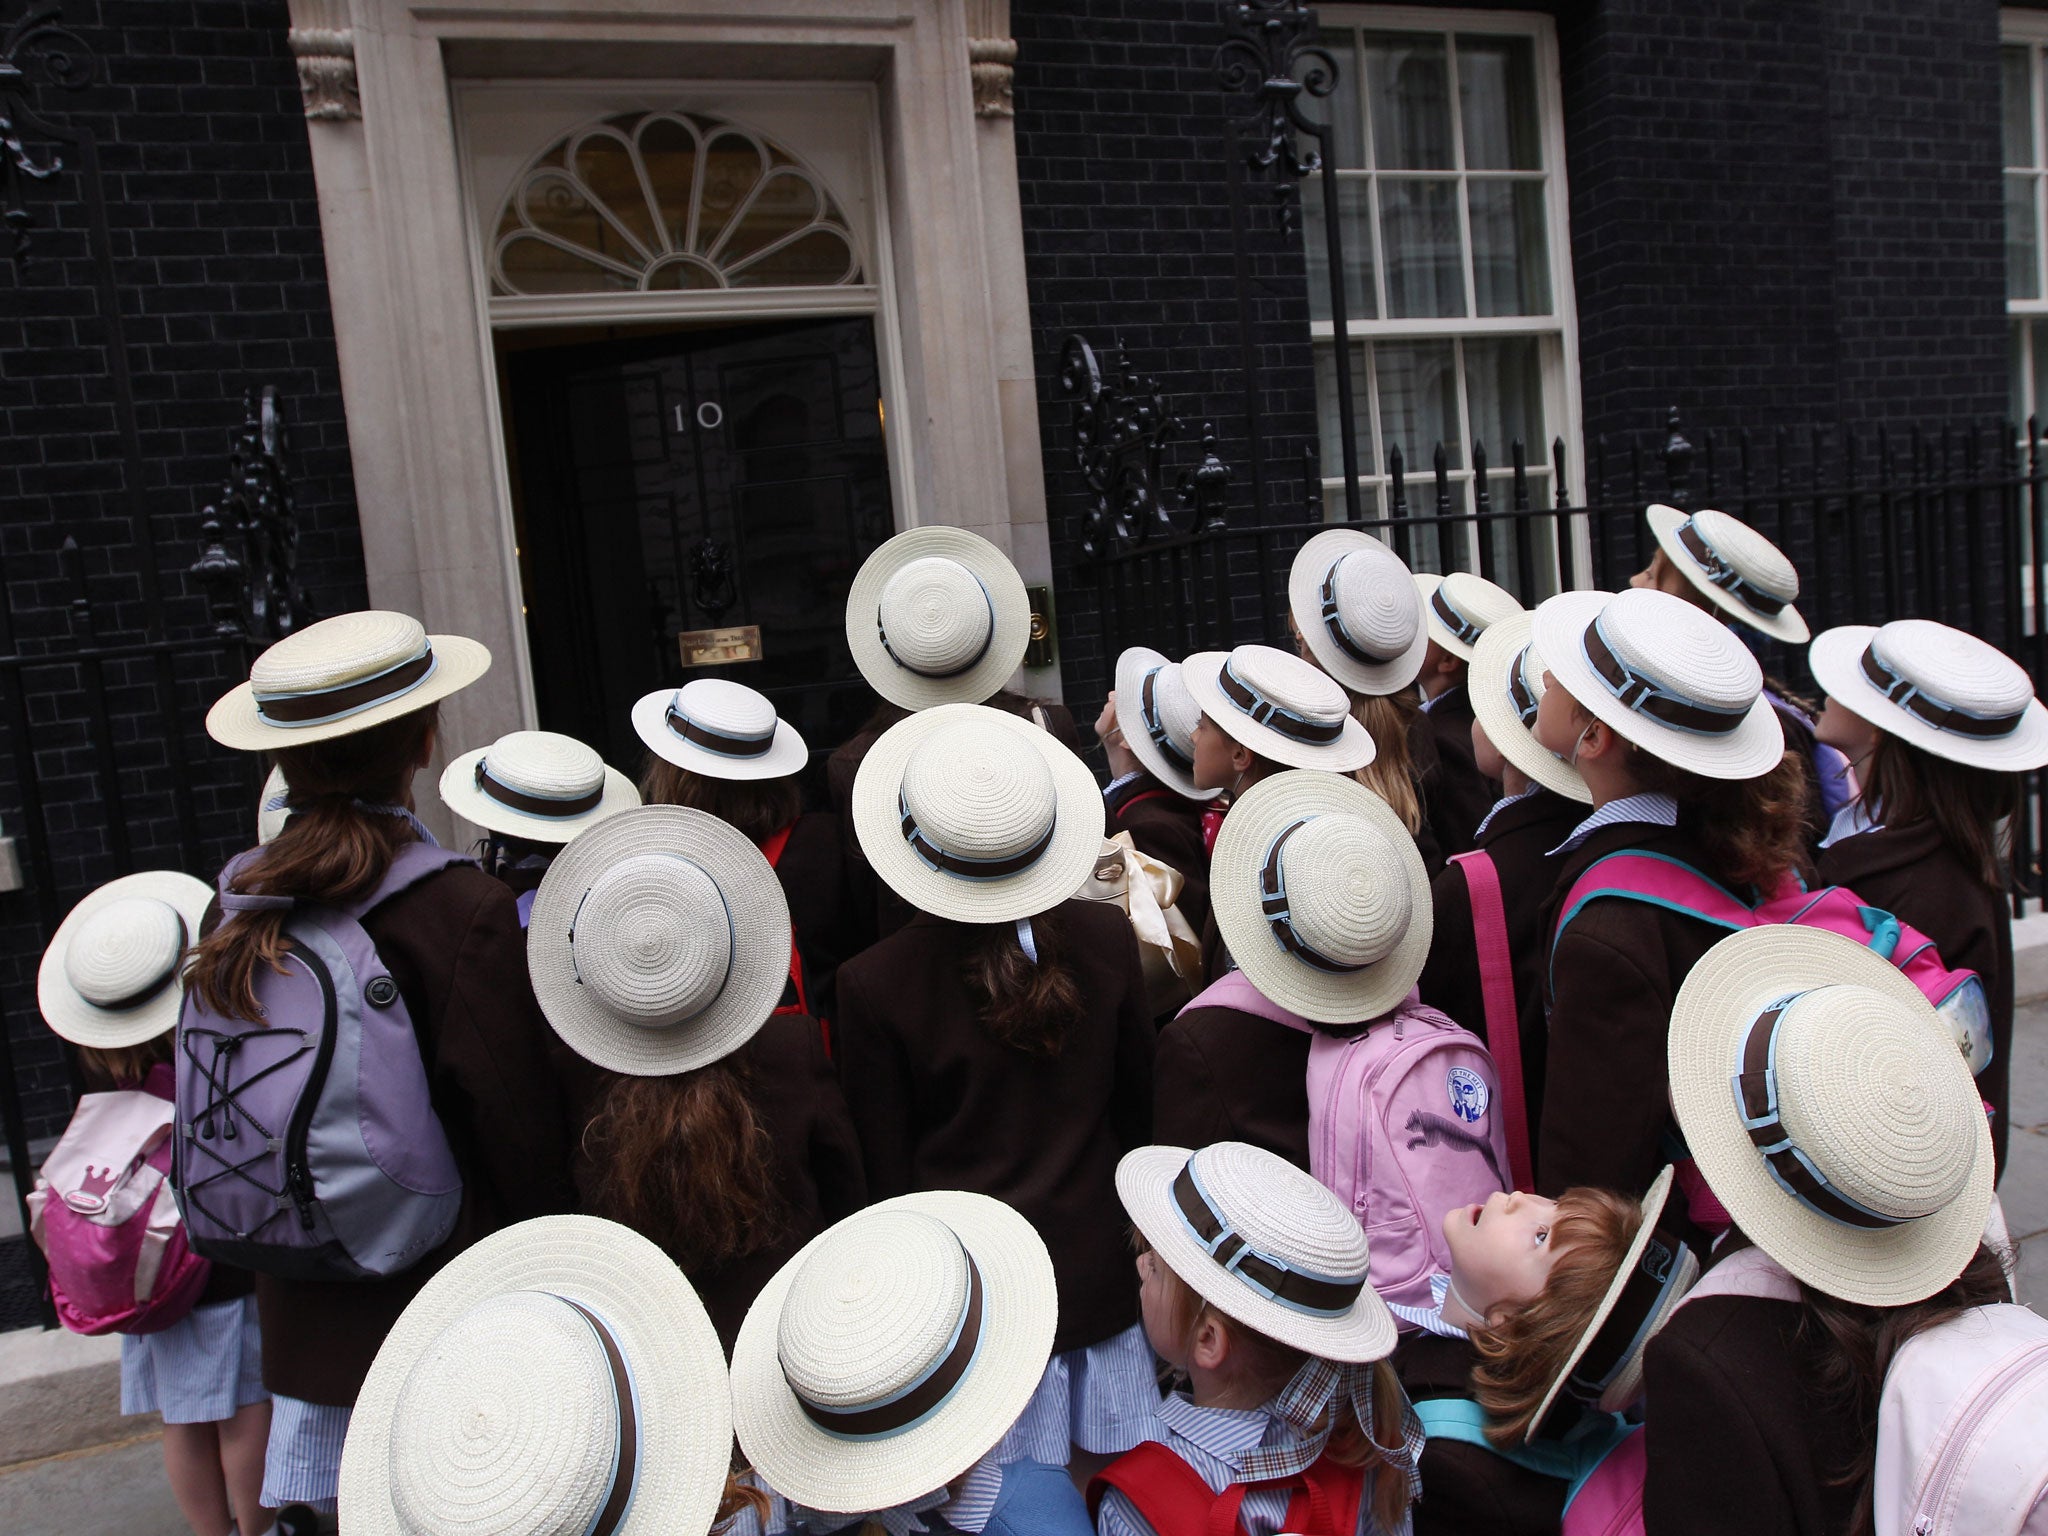 Schoolgirls visiting No 10. Confidence and contacts count as much as results